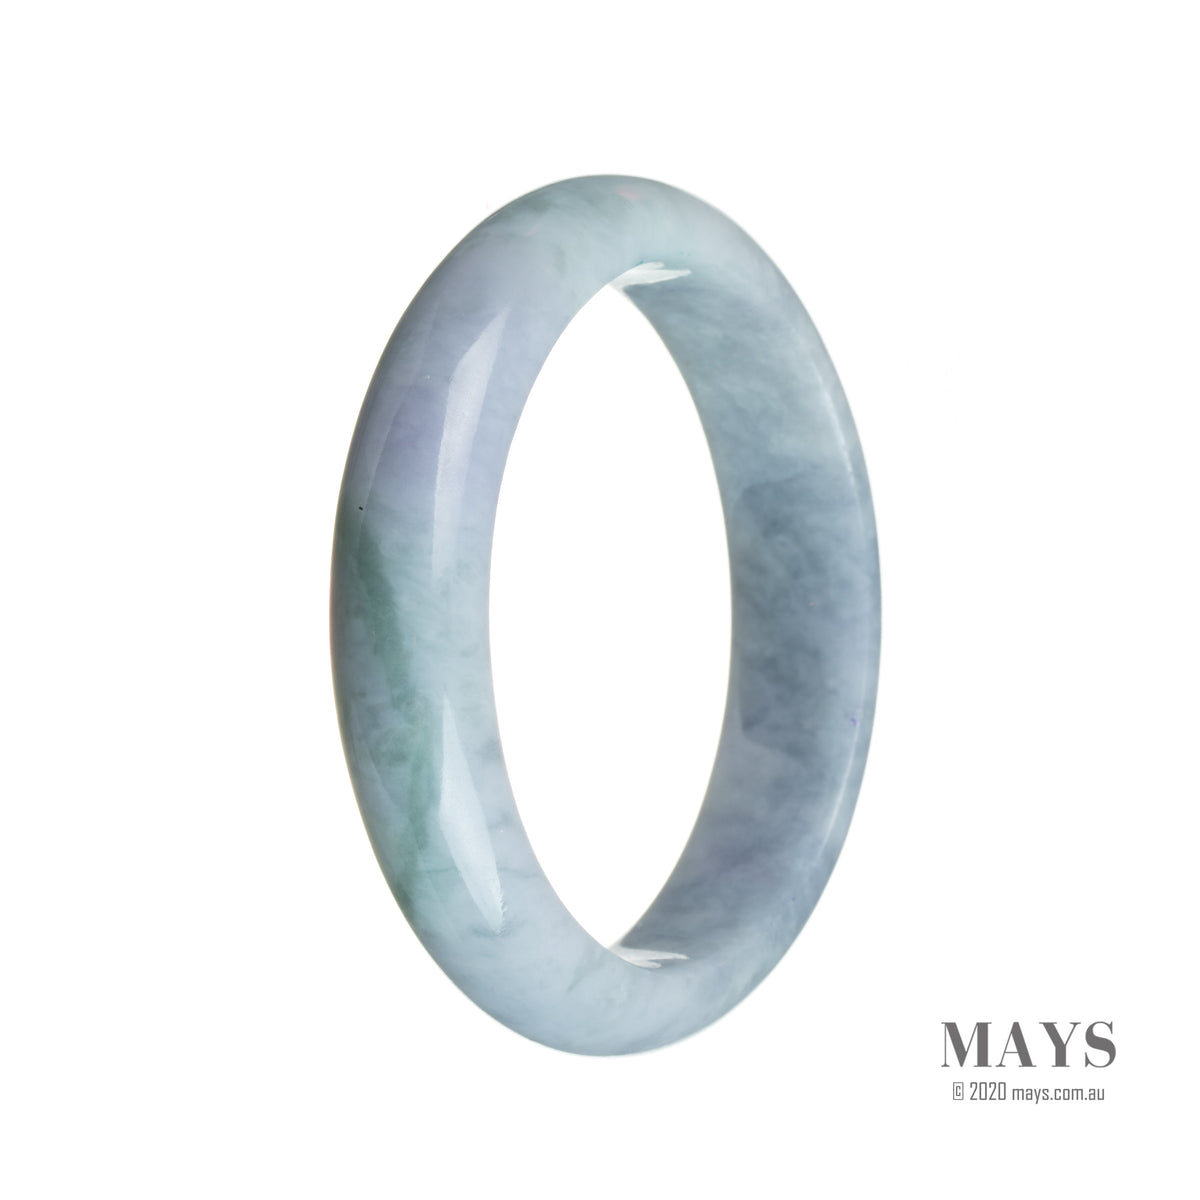 A stunning bluish lavender jade bangle bracelet with a half moon shape, measuring 58mm in size. Perfect for adding a touch of elegance to any outfit.